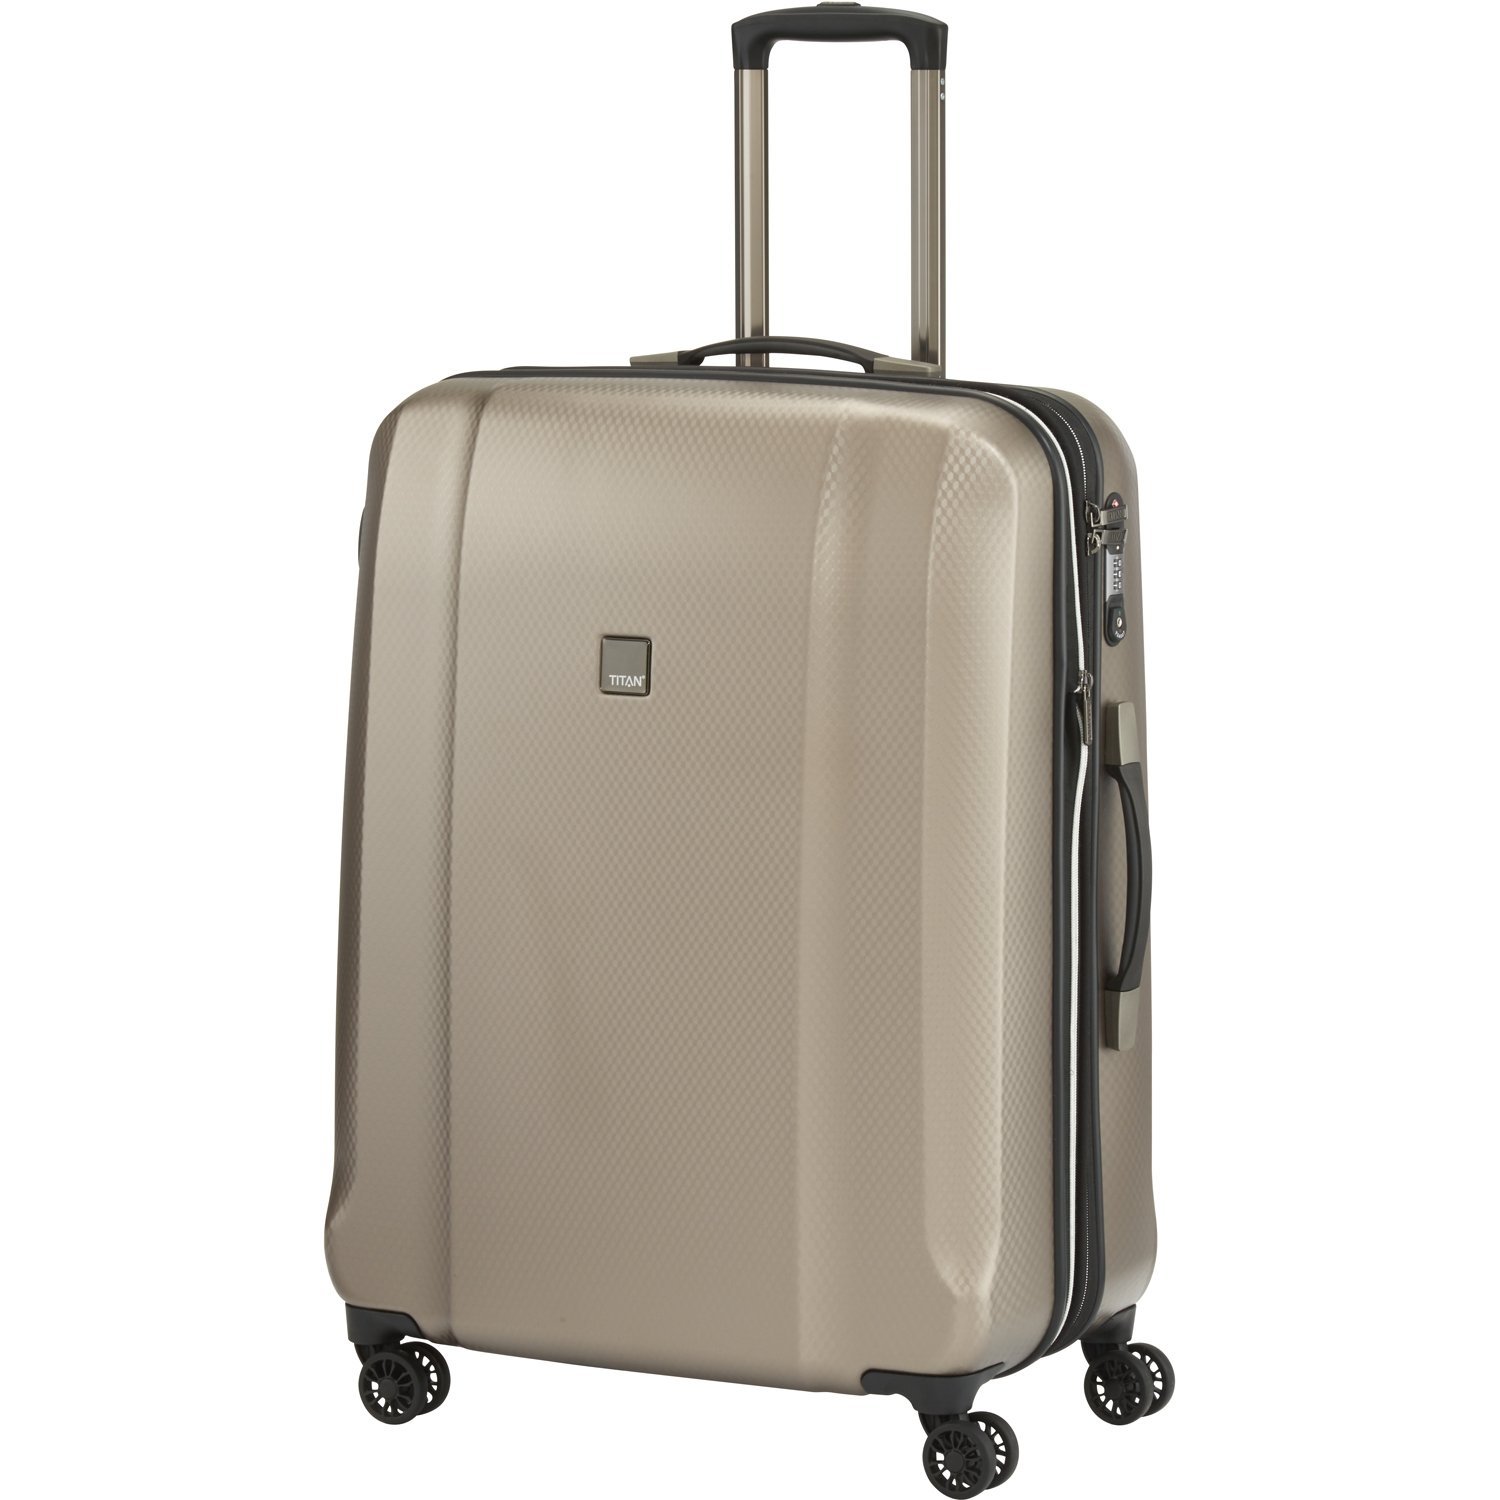 TITAN Valise trolley "Xenon Deluxe" avec 4 roues champagne Koffer, 74 cm, 113 liters, Beige (Champagne)